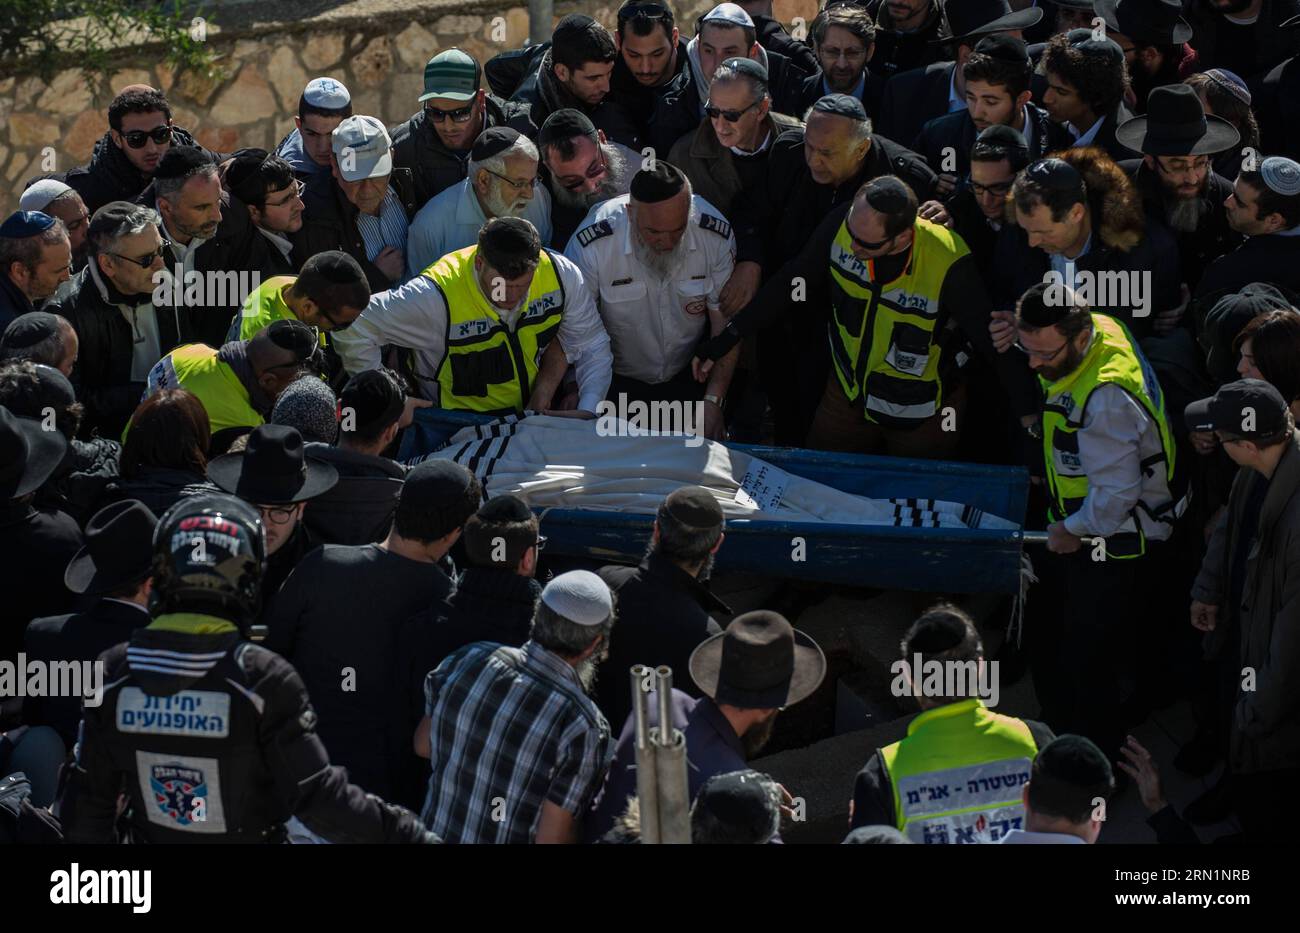 (150113) -- JERUSALEM, Jan. 13, 2015 -- A body of victim of Paris supermarket attack is carried to the grave during a funeral ceremony at Givat Shaul cemetery, on the outskirts of Jerusalem, on Jan. 13, 2015. Israeli leaders and multitude of mourners gathered Tuesday with the families of four Jewish victims of last week s terror attack on a Paris kosher supermarket for a solemn funeral ceremony at a Jerusalem cemetery. Yoav Hattab, Yohan Cohen, Philippe Braham and Francois-Michel Saada, were gunned down on Friday during a hostage attack on Hyper Casher supermarket in eastern Paris. They were a Stock Photo